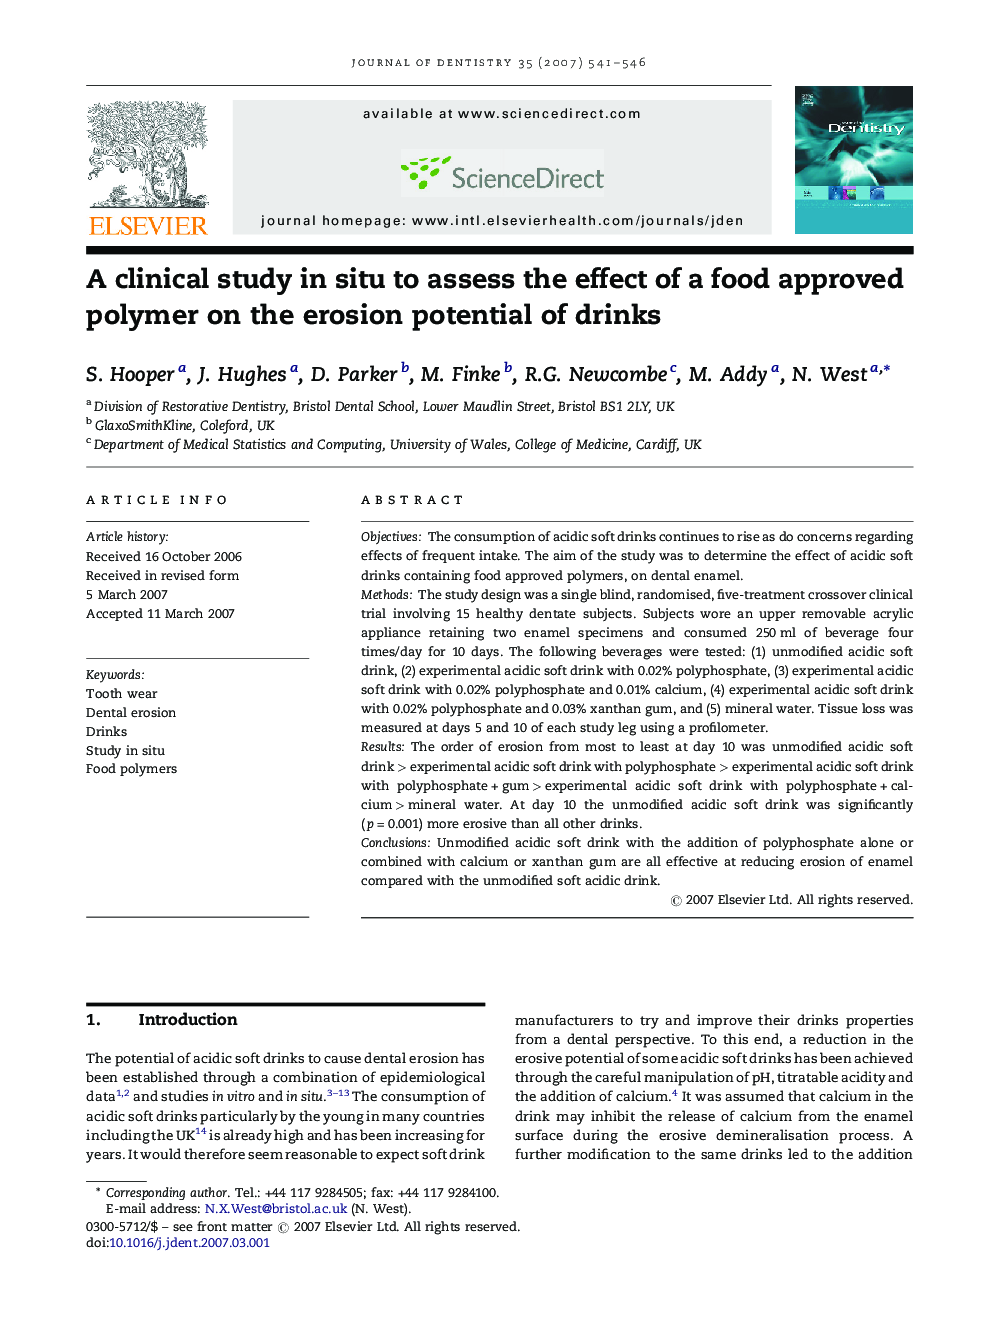 A clinical study in situ to assess the effect of a food approved polymer on the erosion potential of drinks